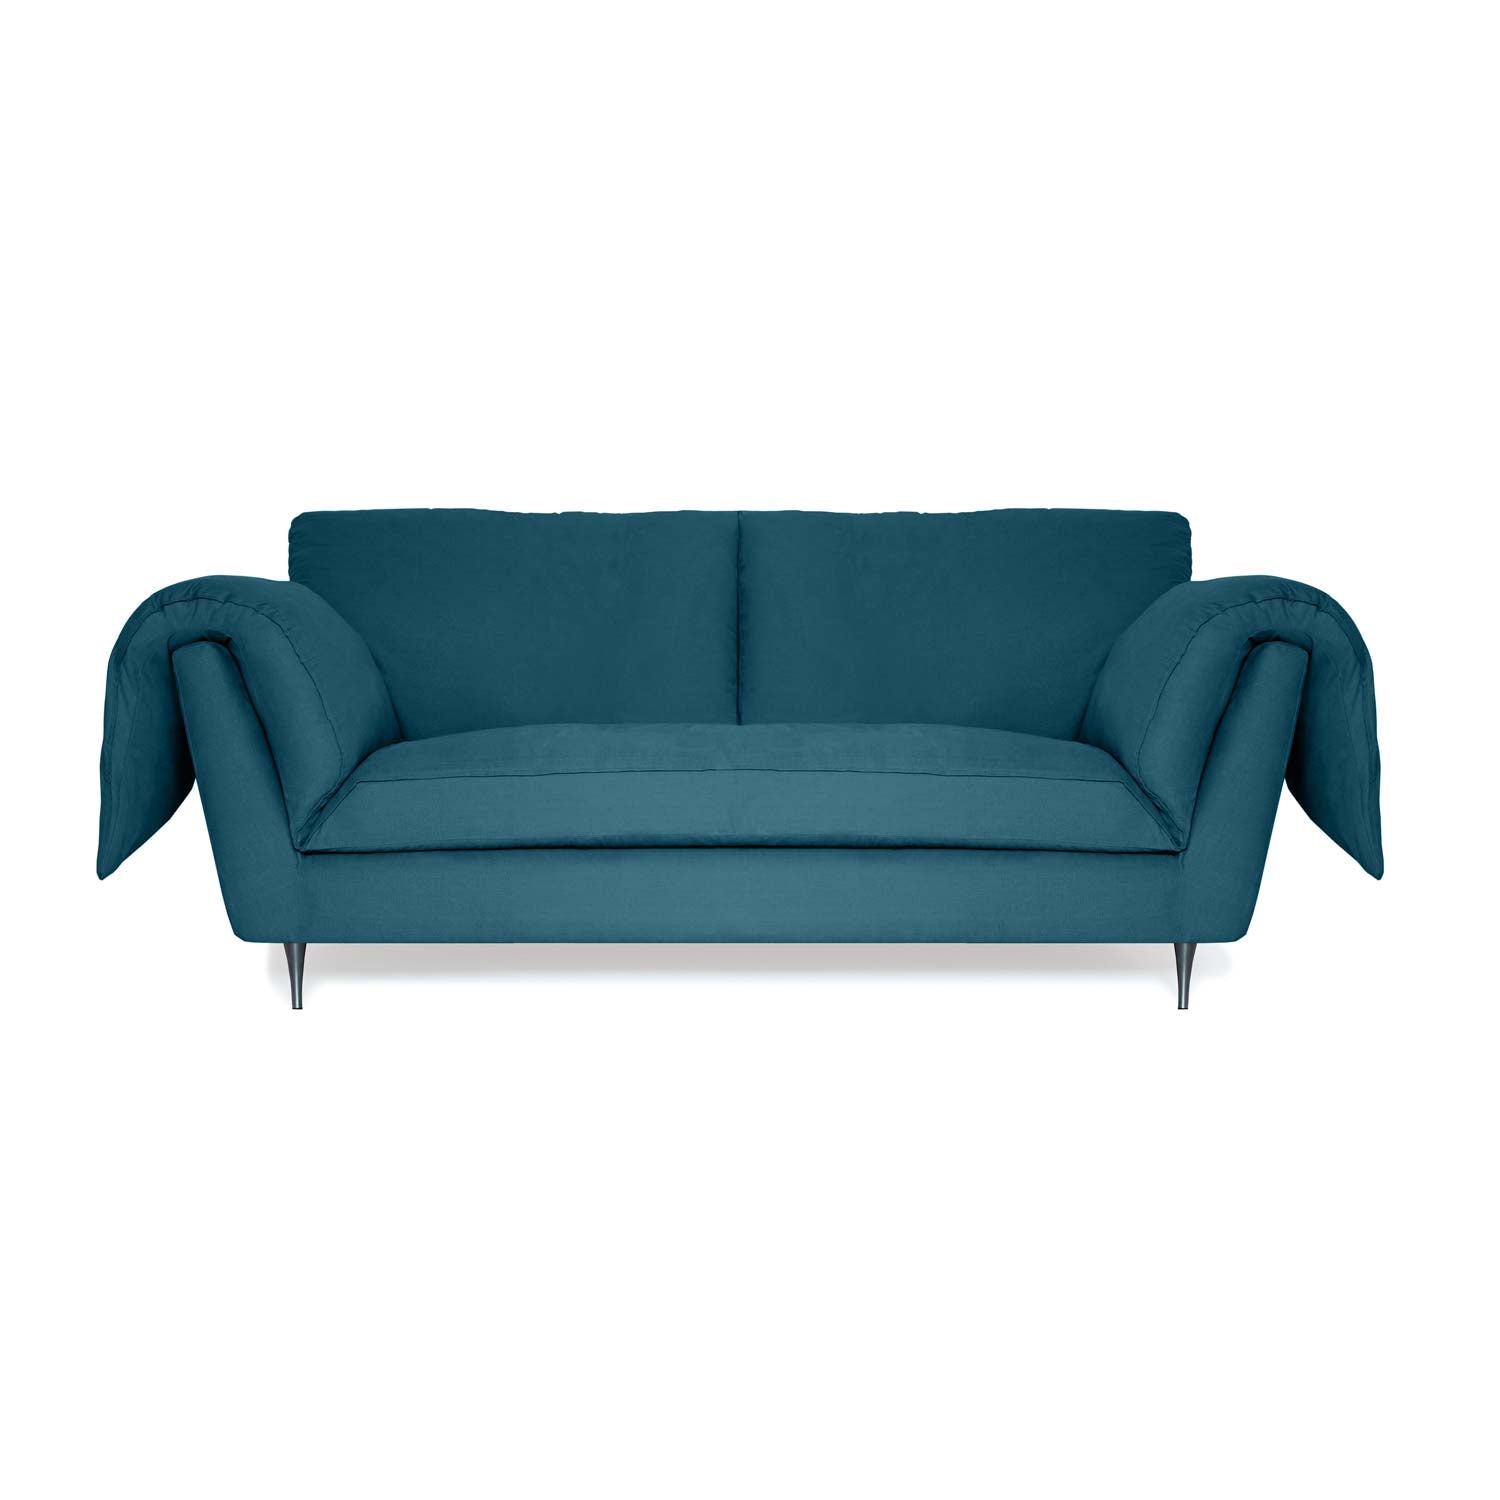 Comfortable Seating - Casquet 2 Seater